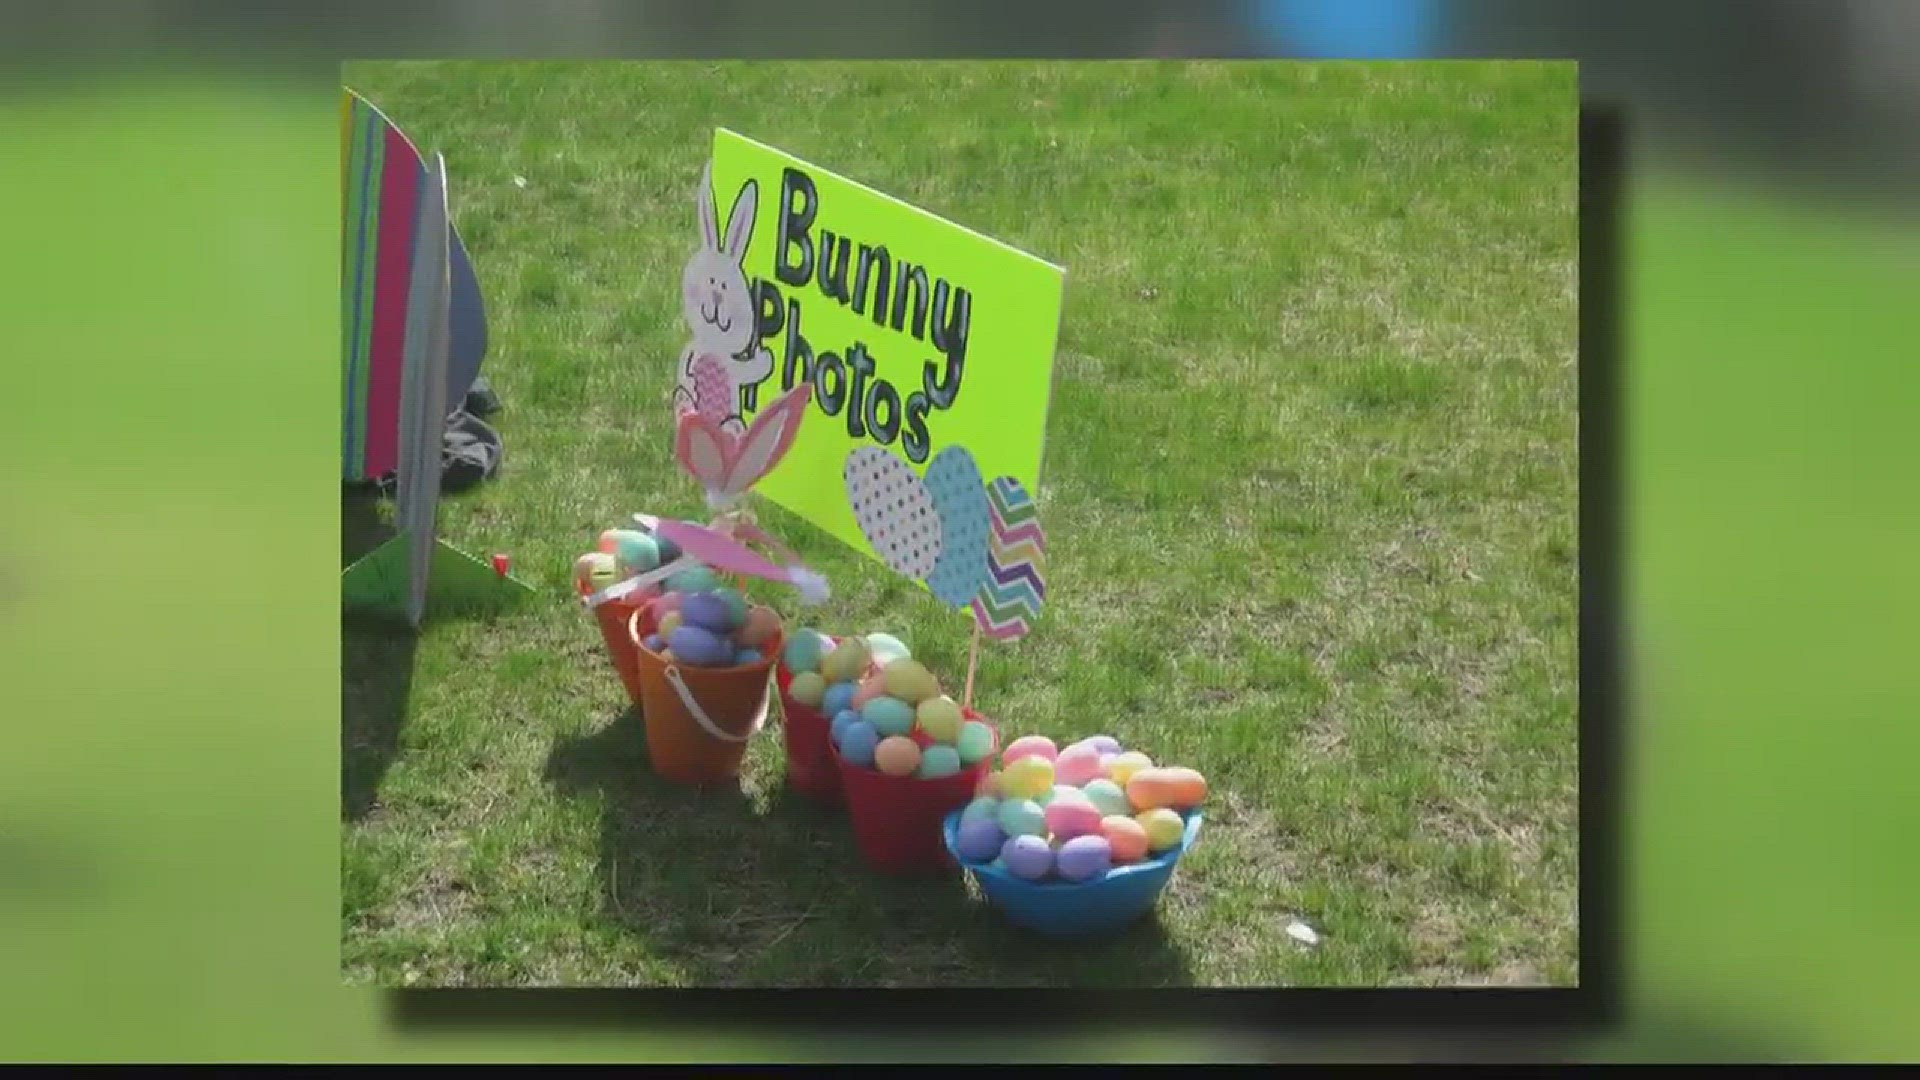 Life Center North Church holds Easter Egg hunt for children with special needs